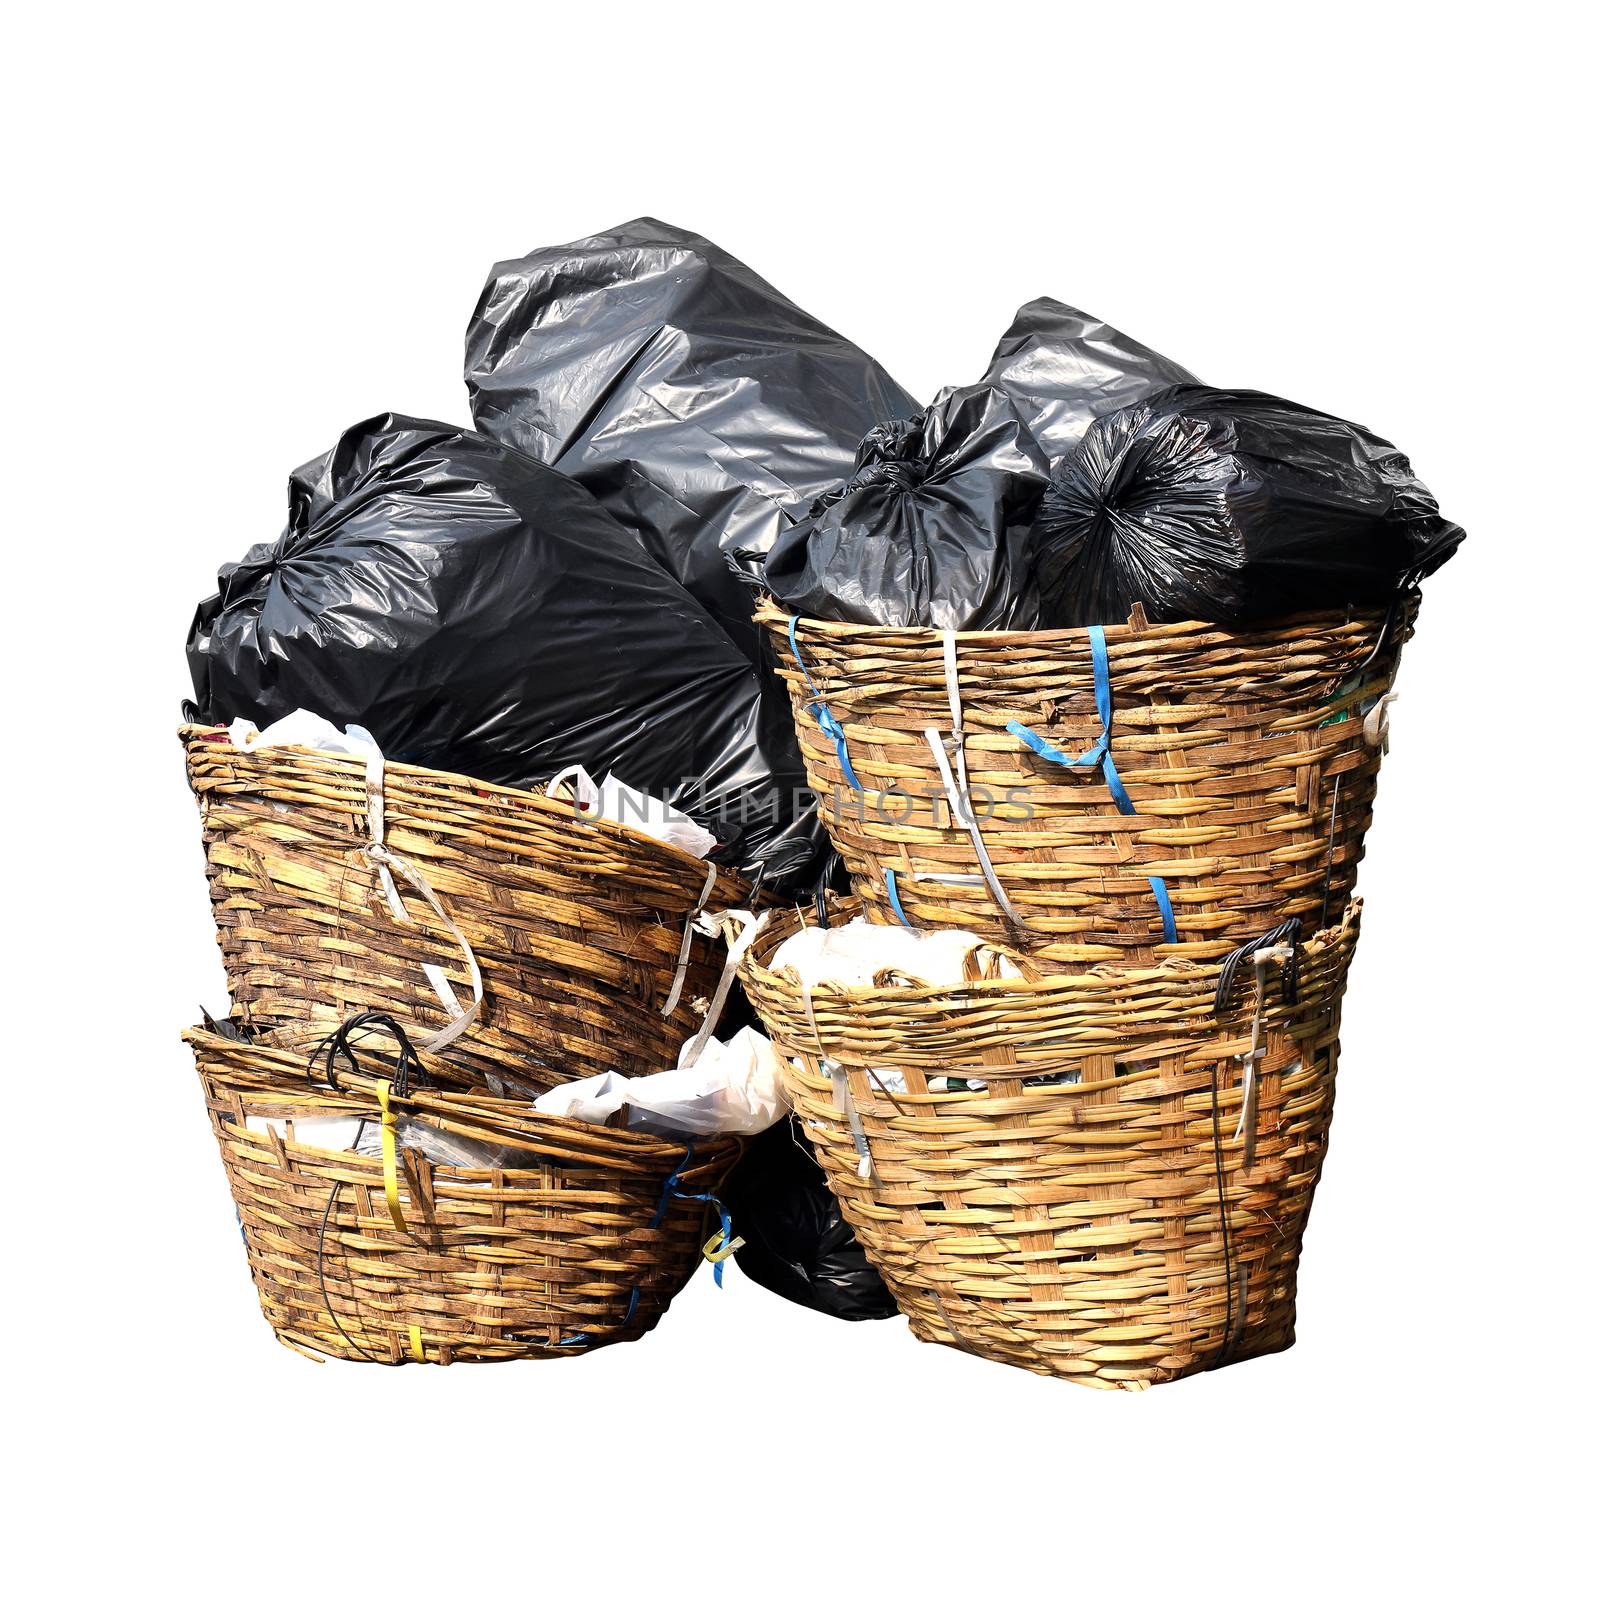 garbage is pile lots dump isolated white background, many garbage plastic bags black waste in basket bin, pollution from trash plastic waste garbage, bags bin of plastic waste, pile garbage waste bin